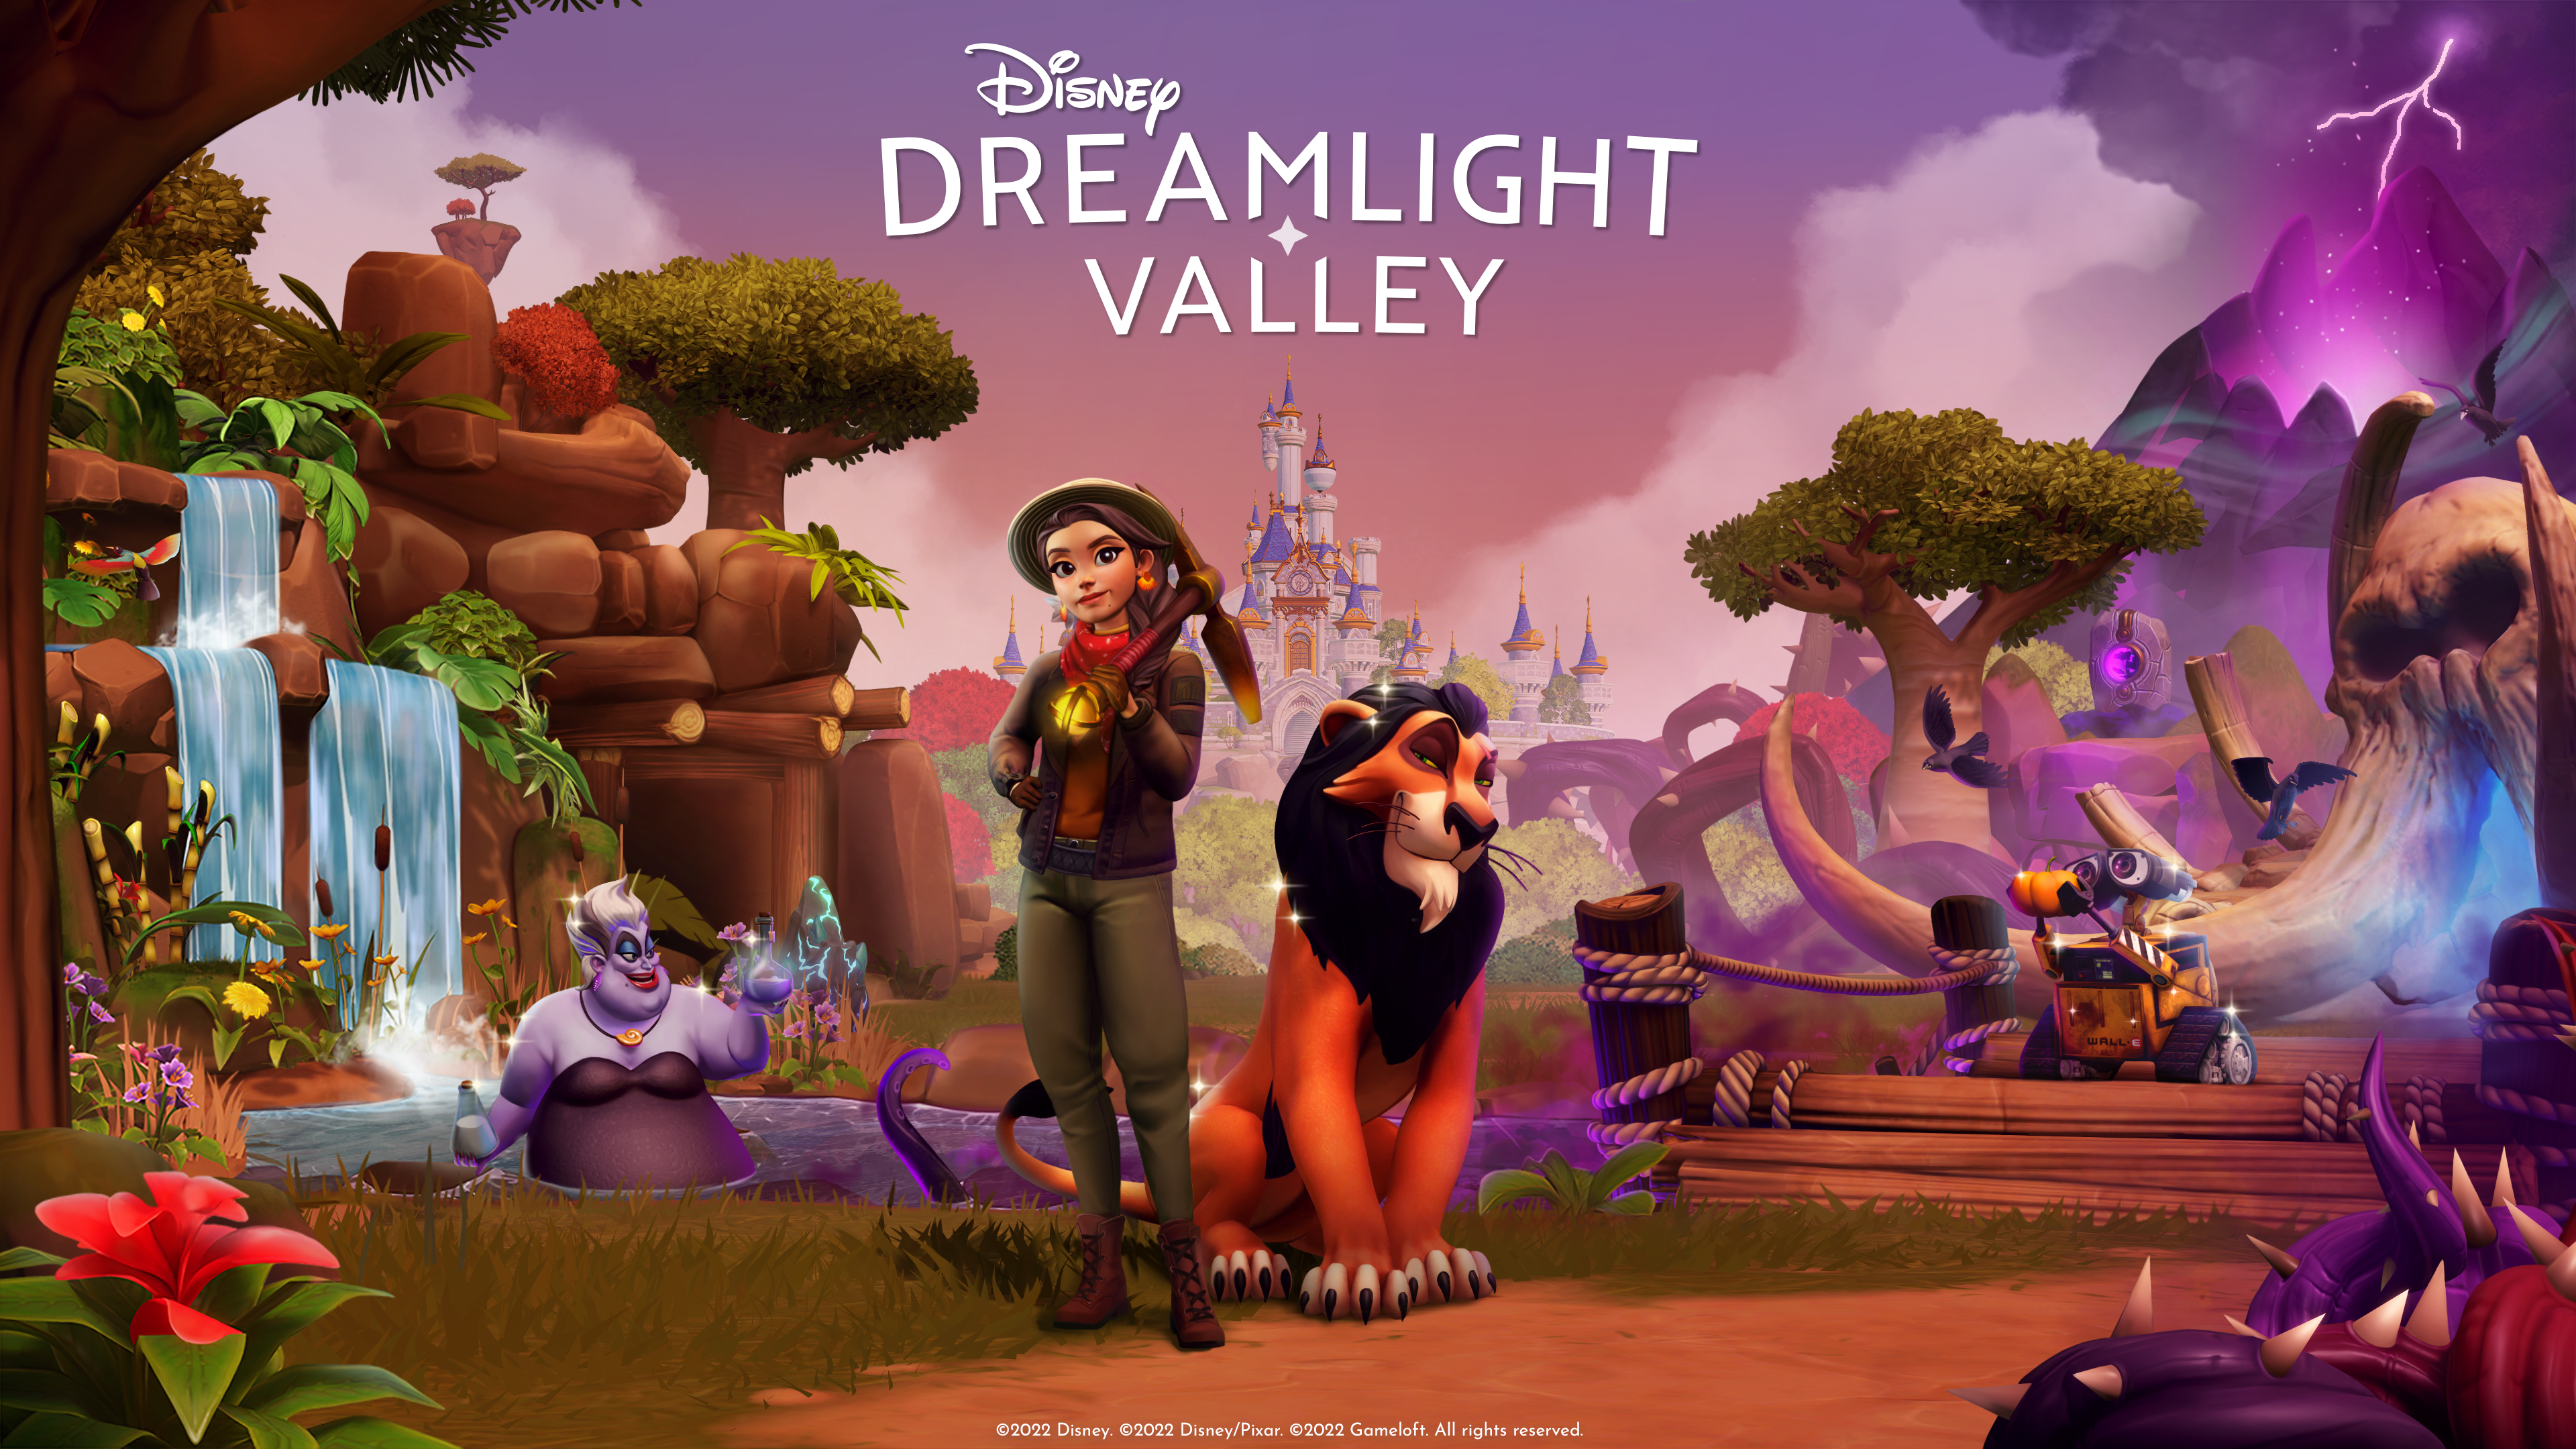 Disney Dreamlight Valley HD desktop wallpaper featuring animated characters with a magical castle in the background.